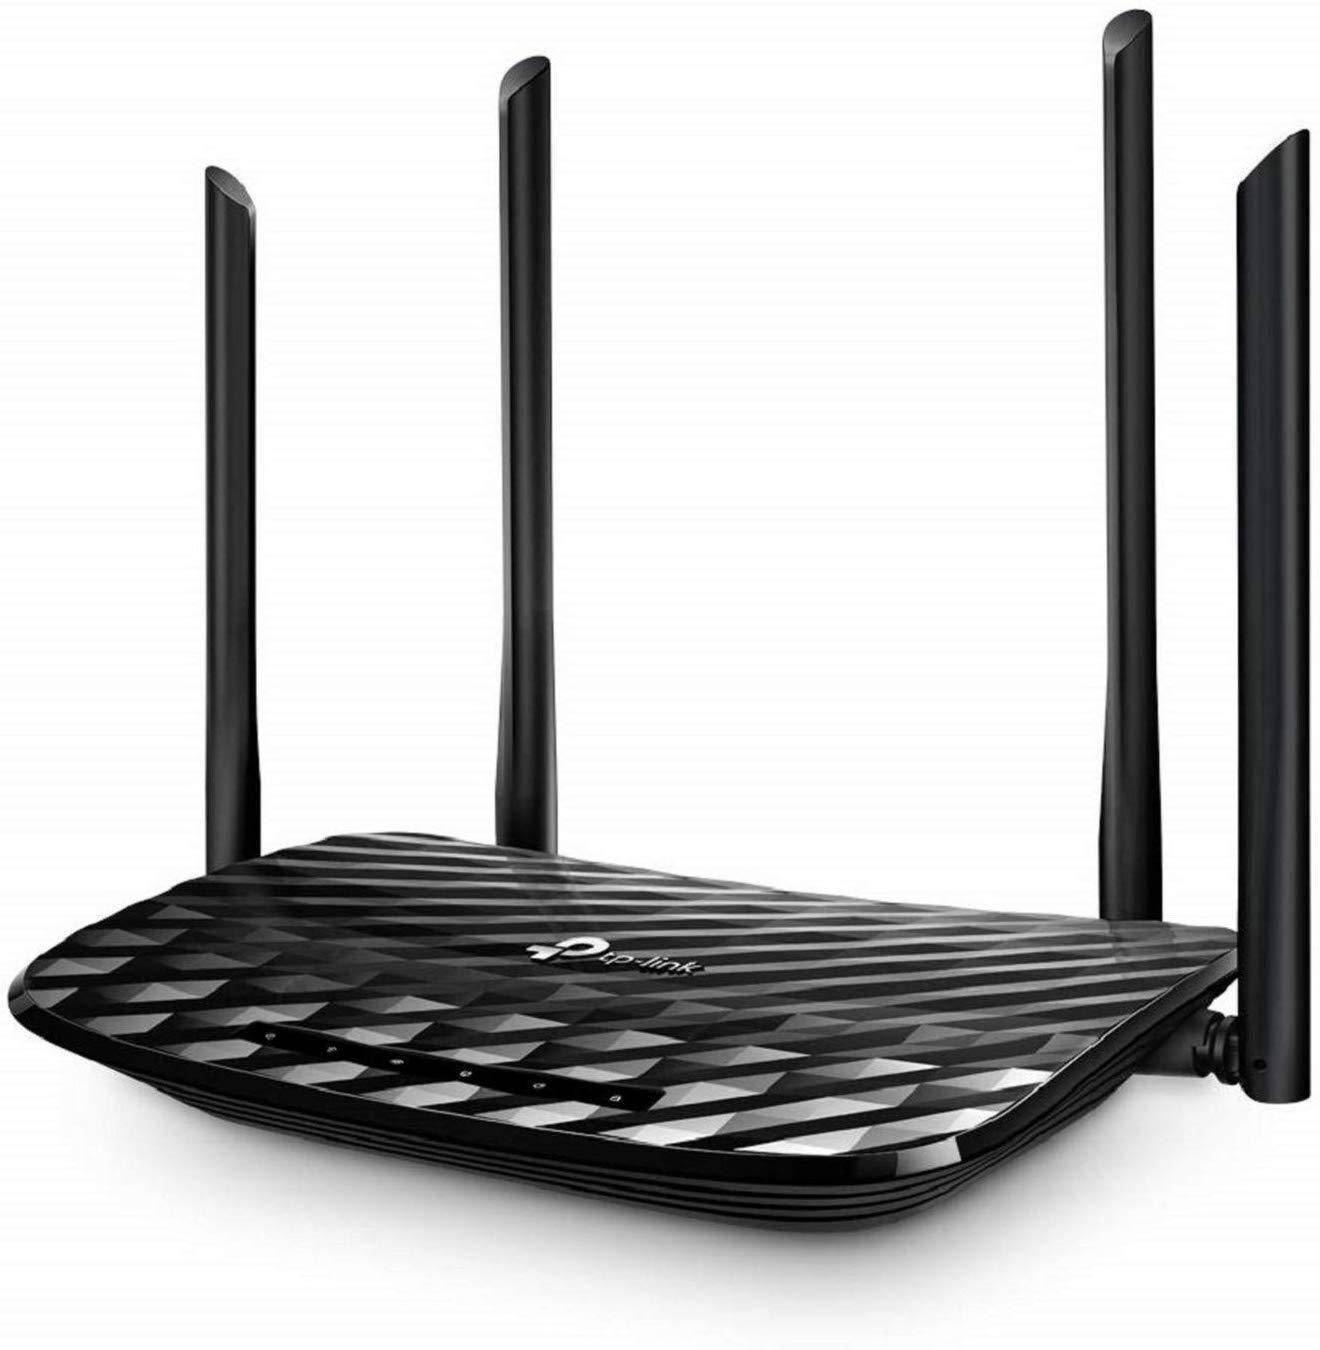 TP-Link Archer C6 Gigabit MU-MIMO Dual Band WiFi Router zoom image